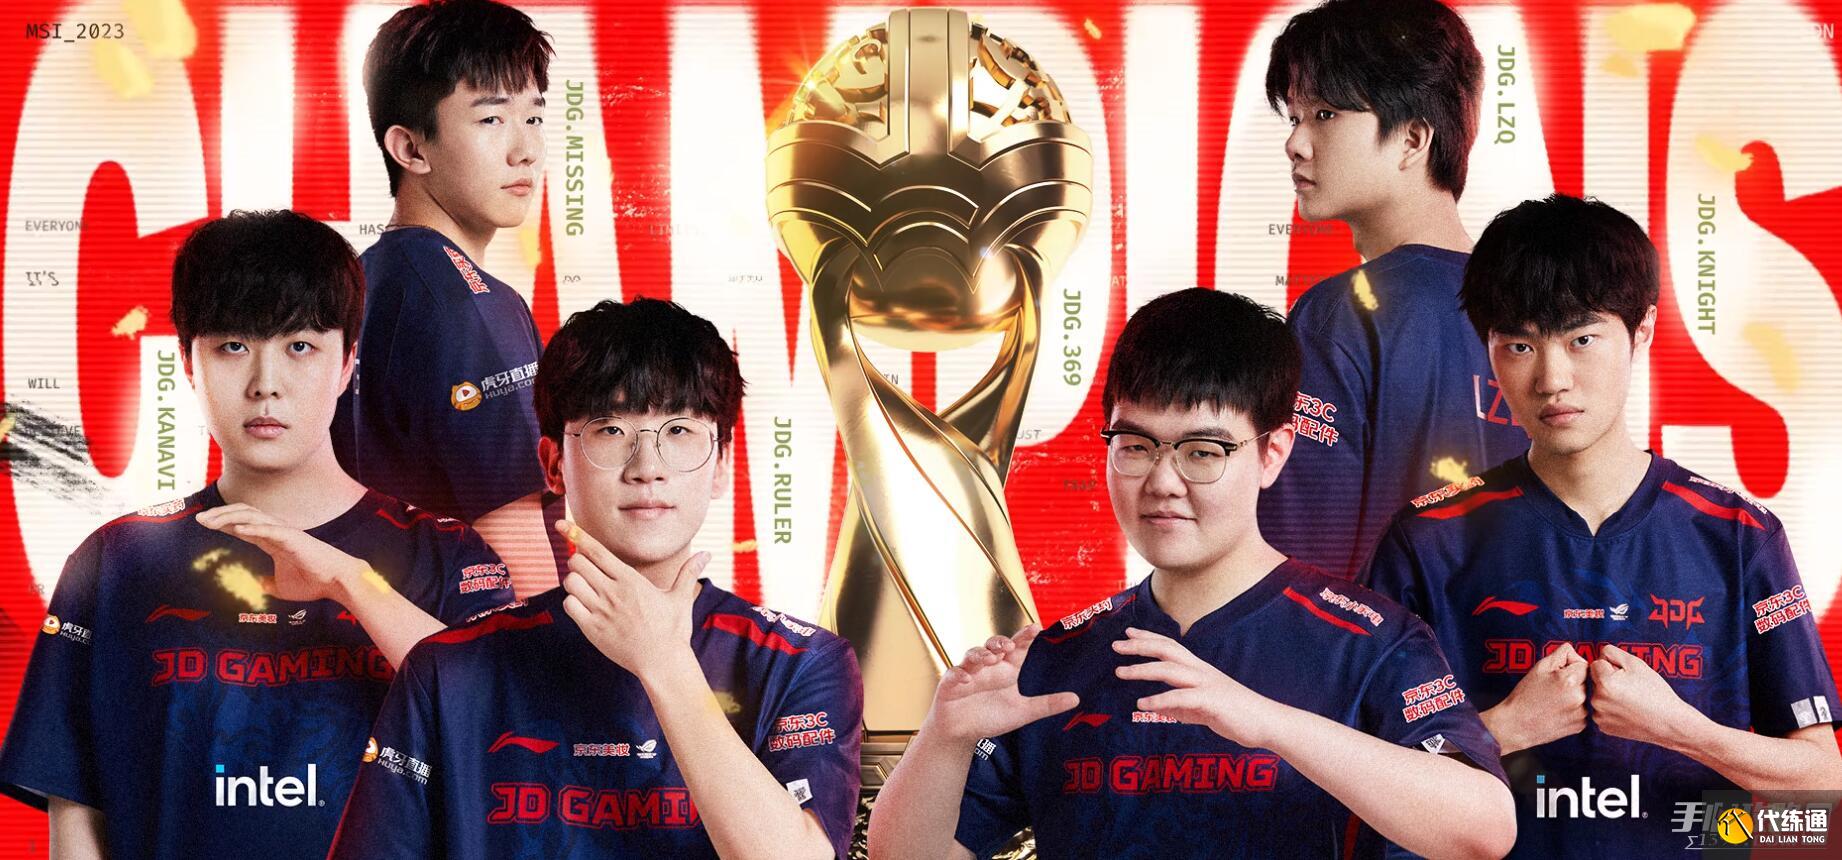 The 29 most powerful photos from the 2018 League of Legends World Championship | Dot Esports